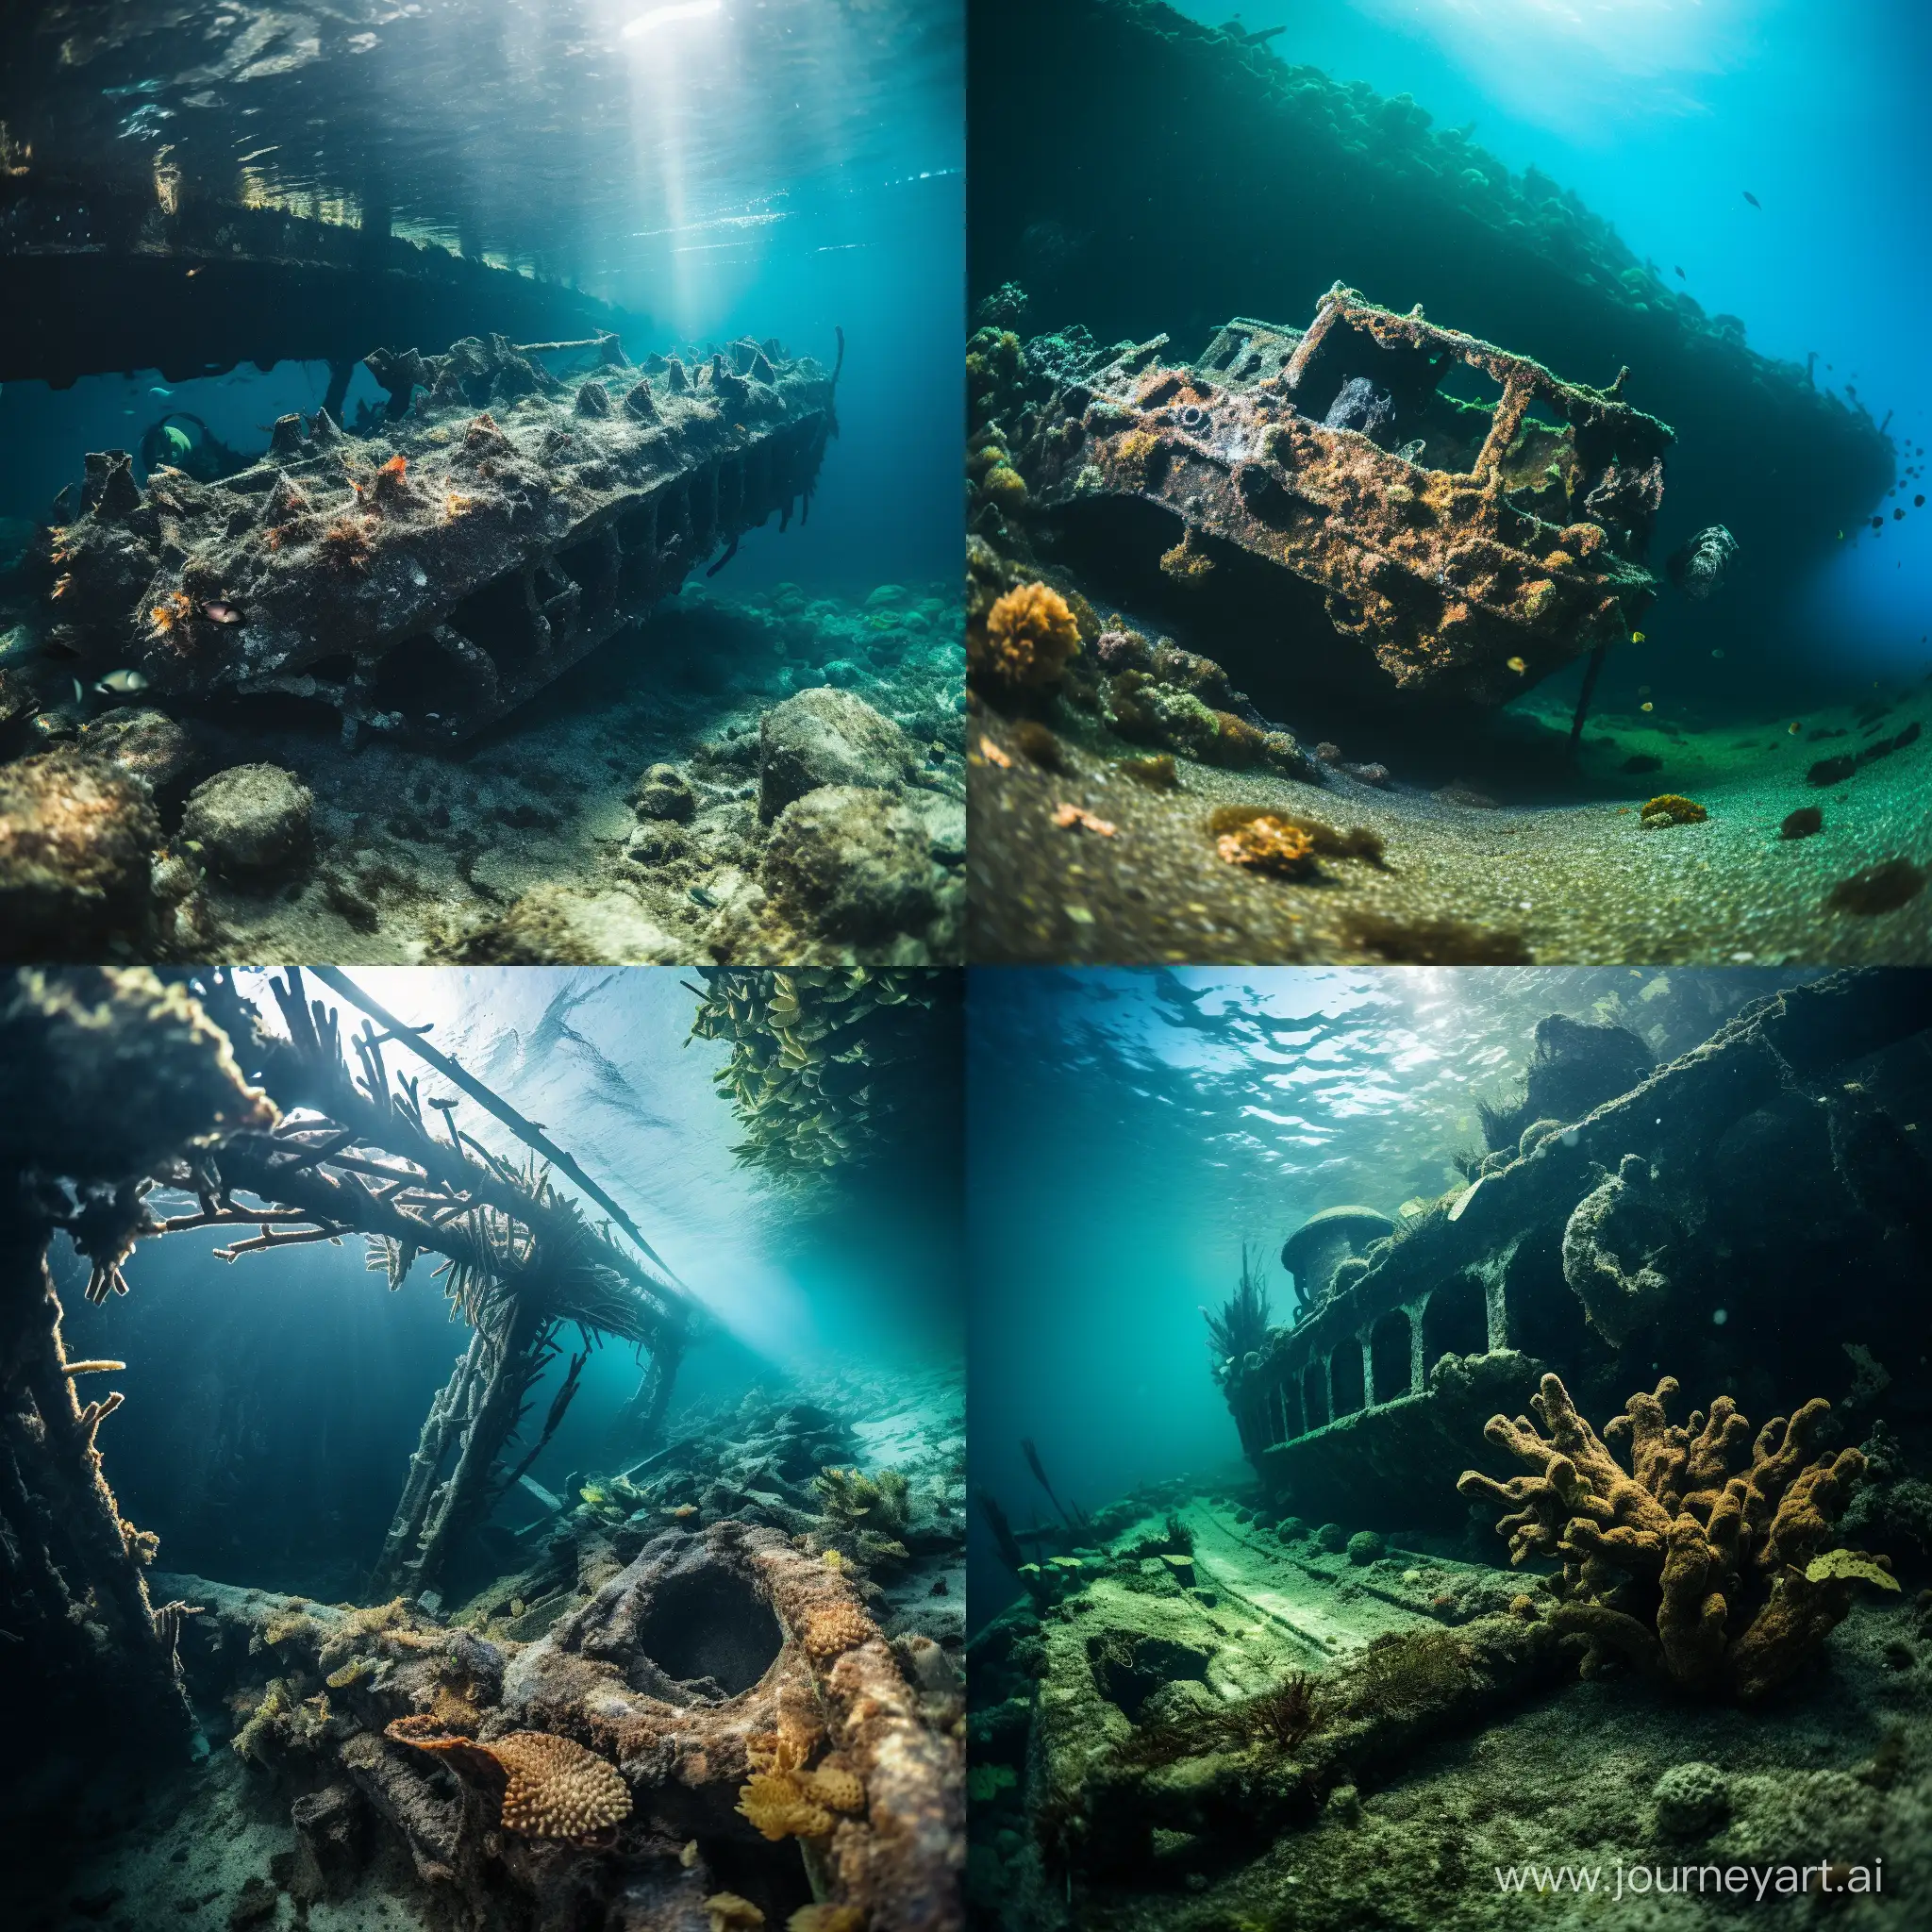 Sunken-Ancient-Shipwreck-with-Marine-Life-and-Treasures